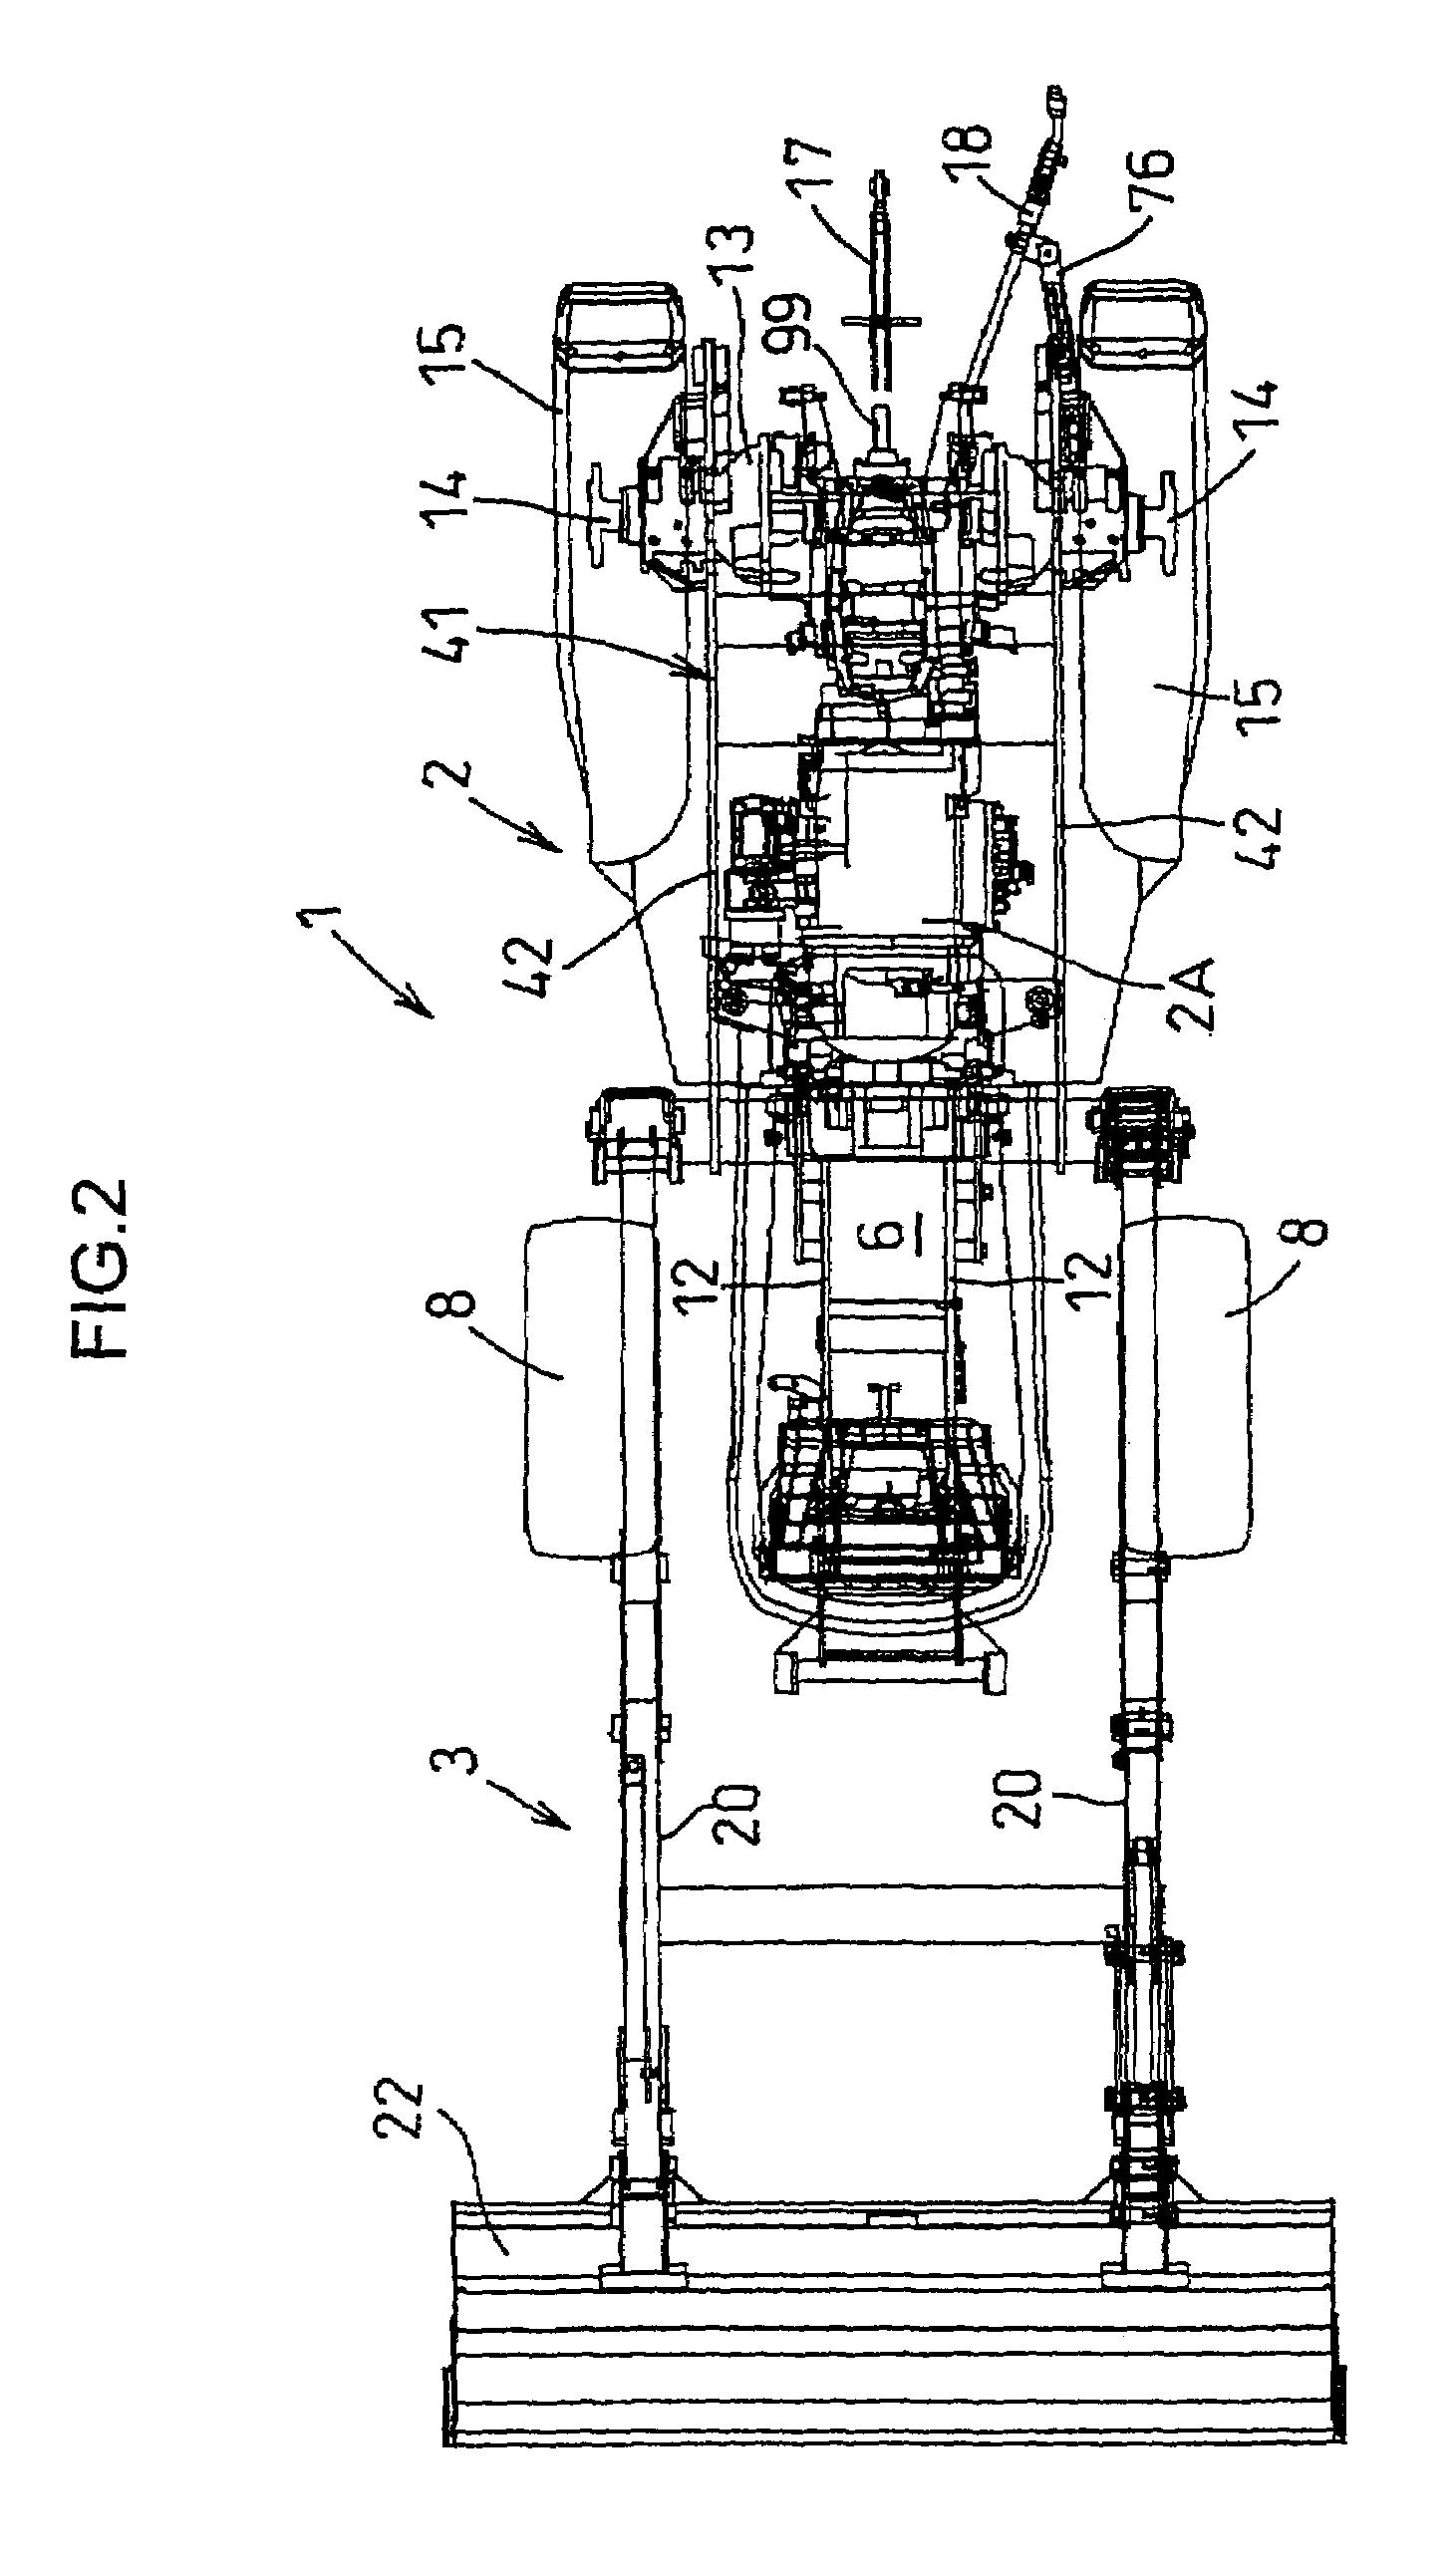 Mounting frame unit for attaching working implements to a tractor body